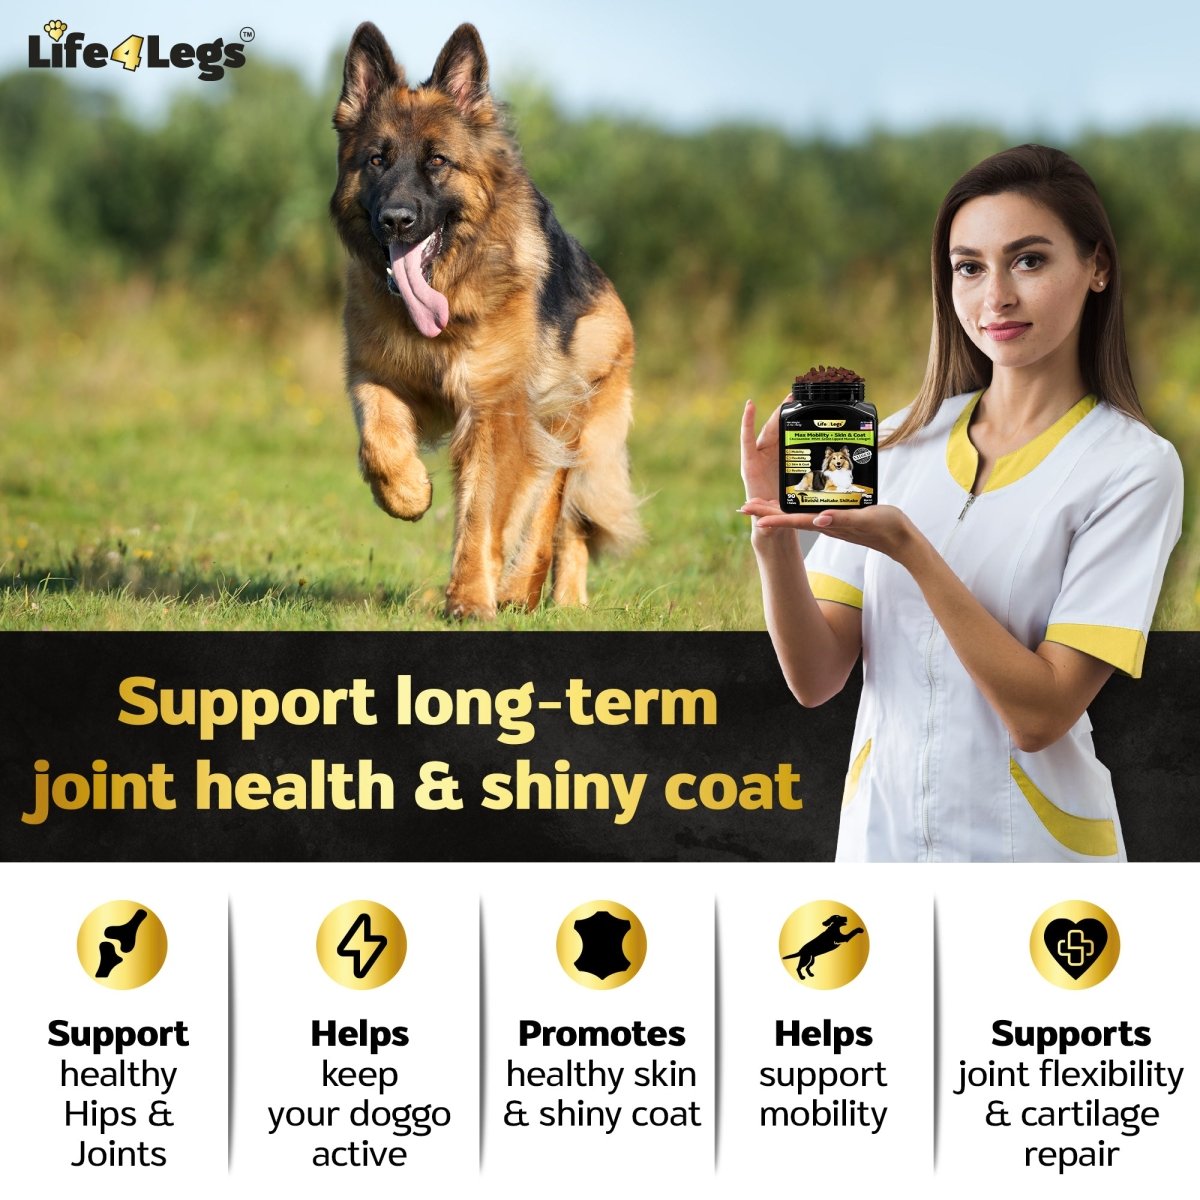 Life4Legs - Hip and Joint 90 Chews for Dogs + Skin and Coat Supplement - Dog Joint Pain Relief Treats - Glucosamine, Chondroitin, MSM, Hemp Oil, Turmeric, Omega 3 for Dogs, Mobility Dog Health Supplies - Life4legs